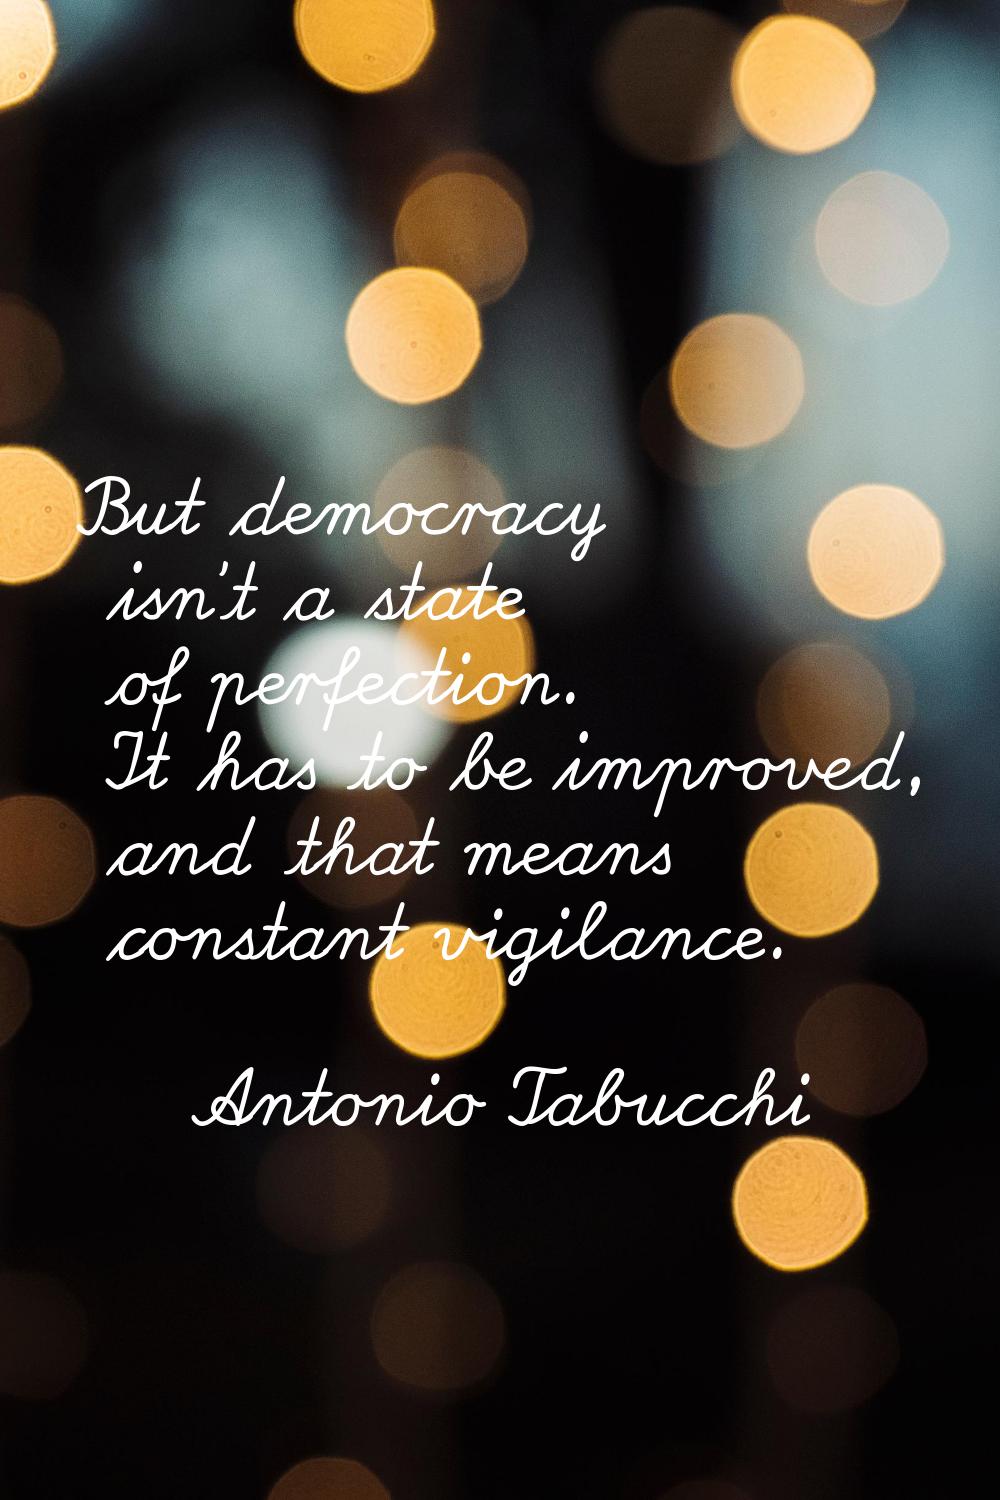 But democracy isn't a state of perfection. It has to be improved, and that means constant vigilance